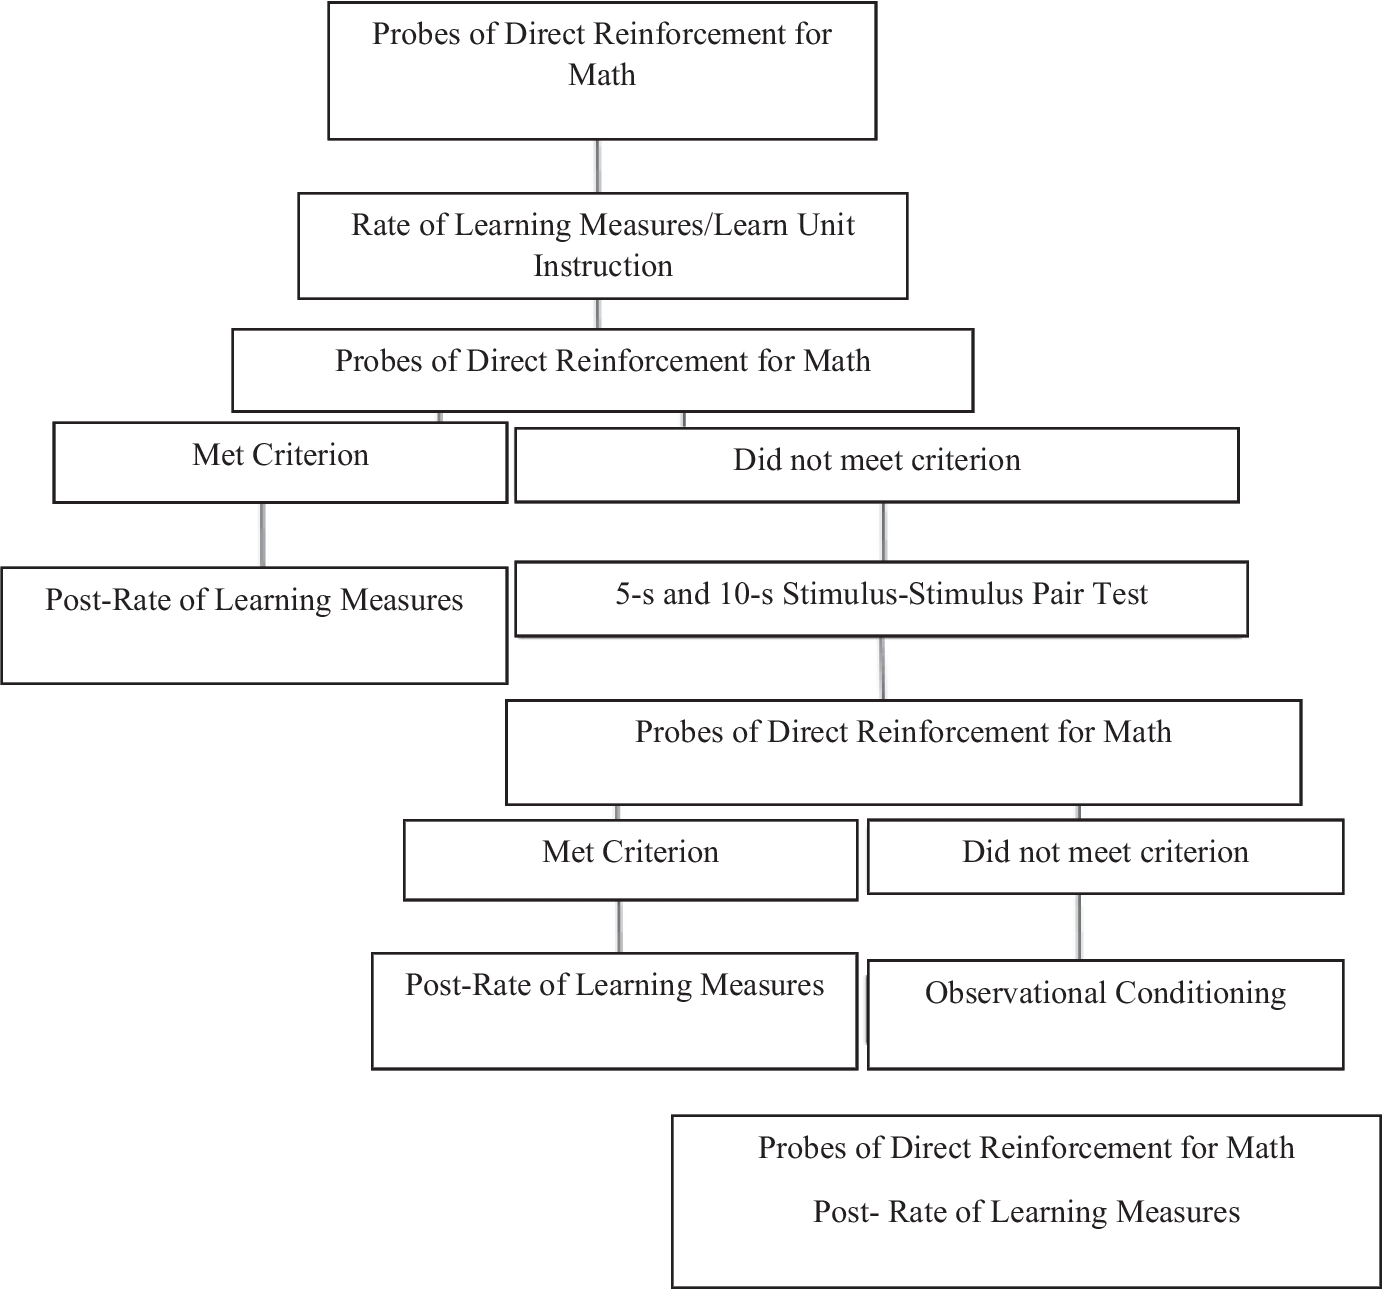 The Effect of the Establishment of Preference for Math on Rate of Learning for Pre-Kindergarten Students